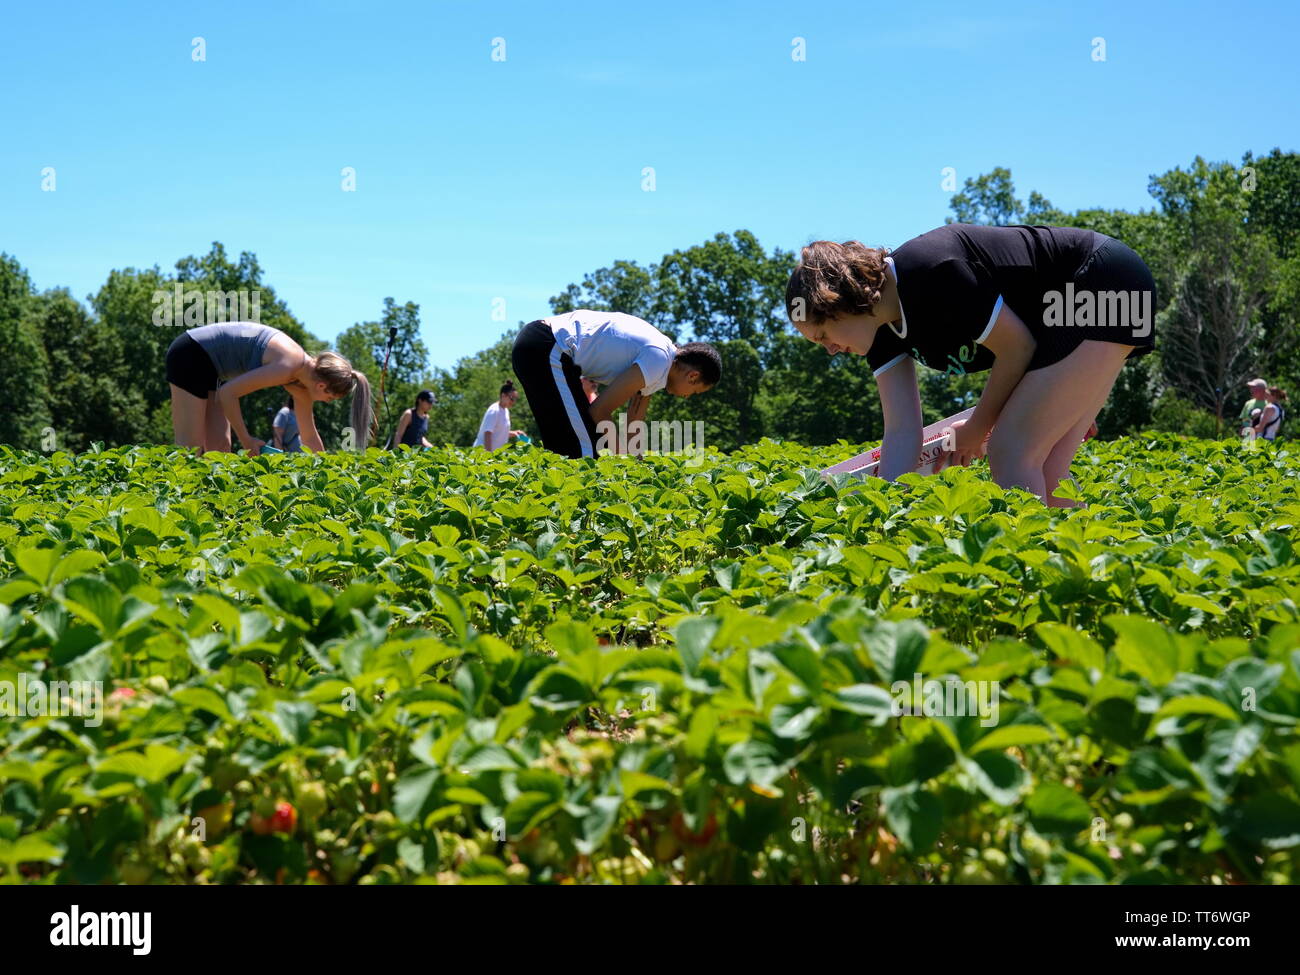 Middlefield, CT USA. Jun 2019. Friends sharing some quality times picking strawberries at a local New England orchard. Stock Photo